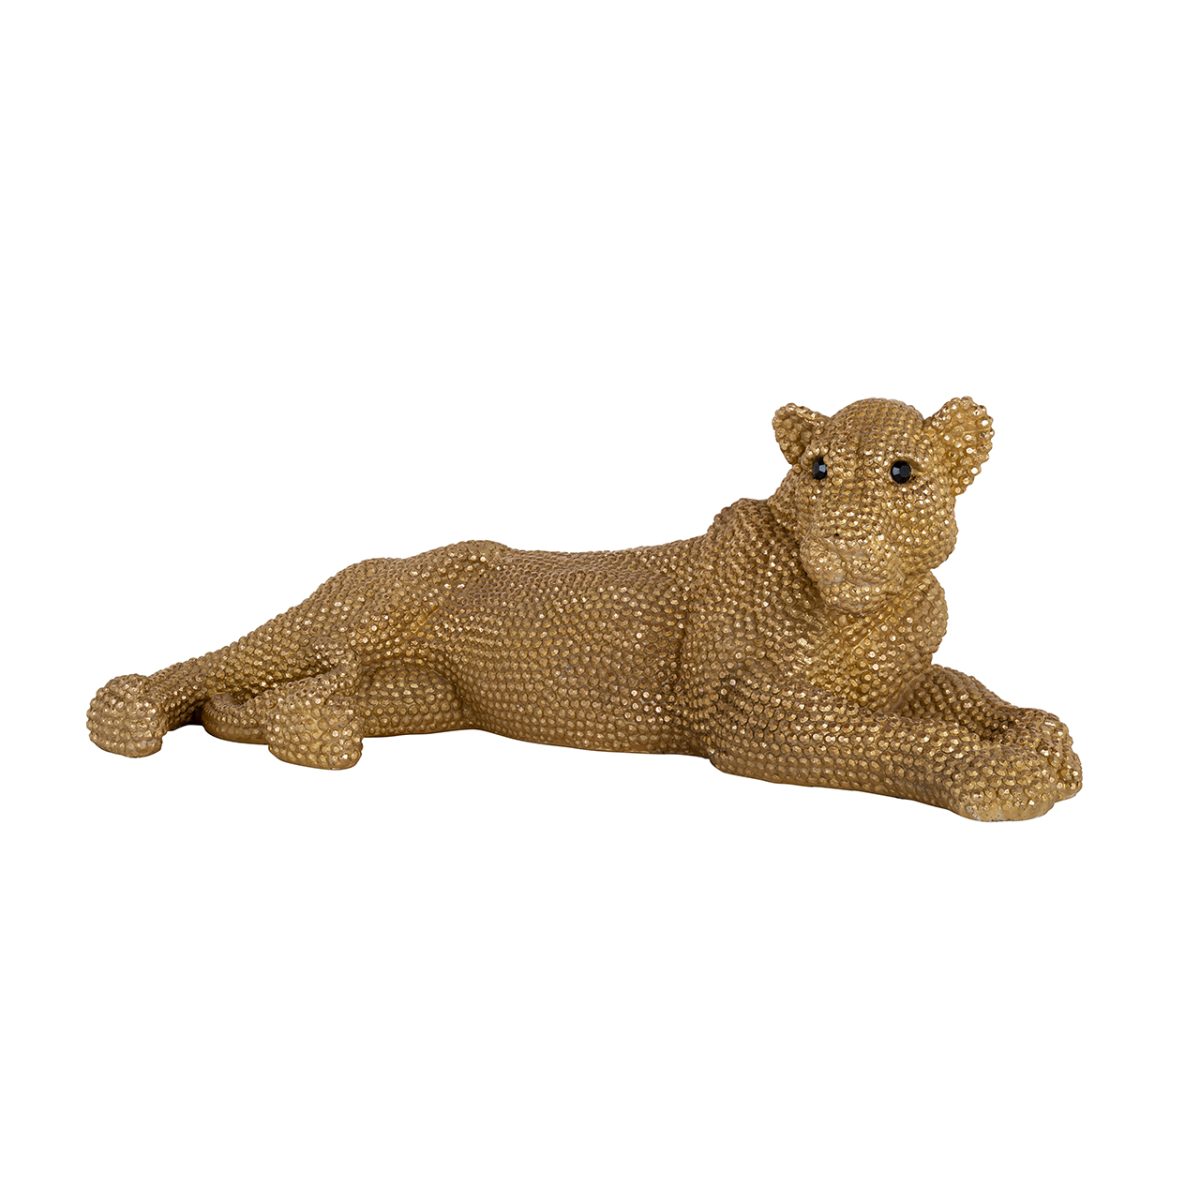 -AD-0001 - Lion deco object (Gold)